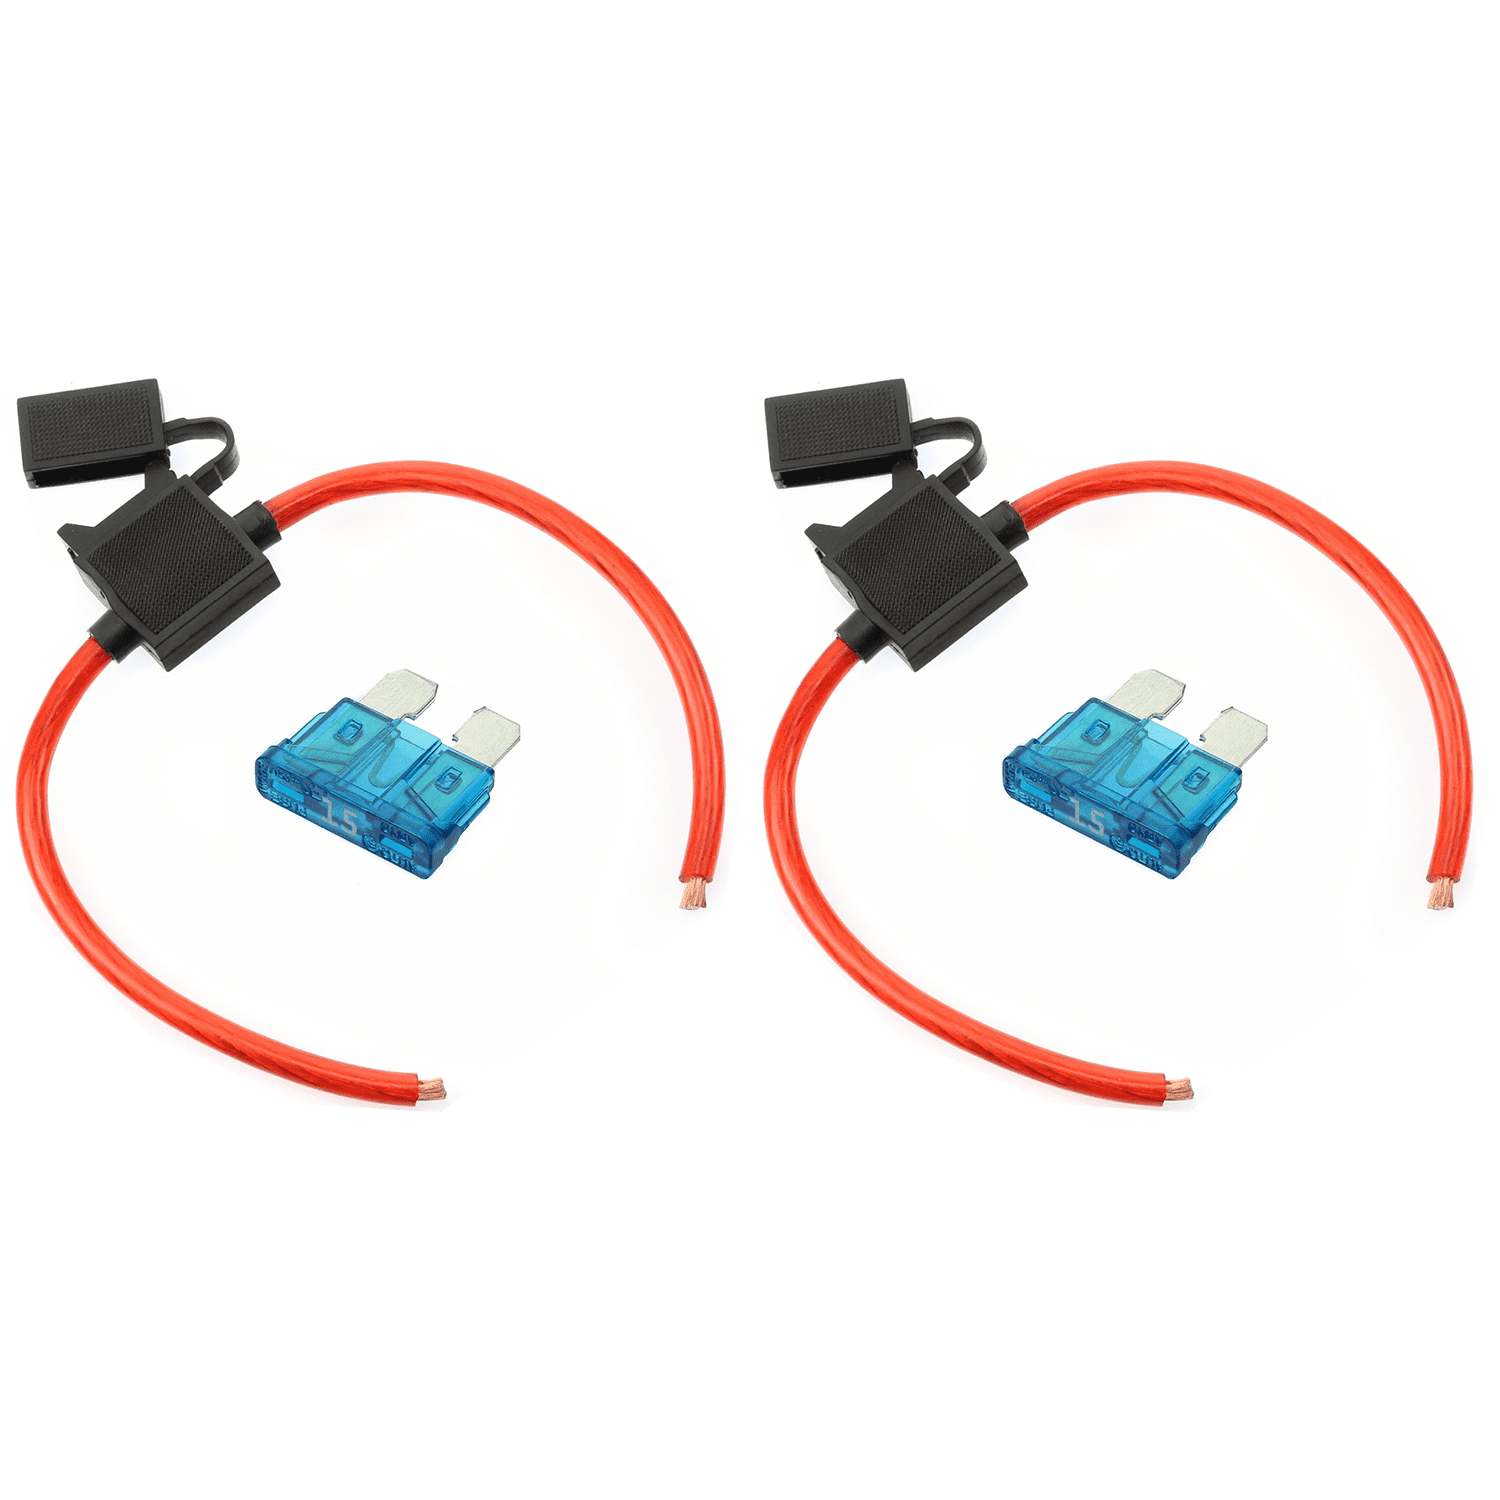 Details about   16 Gauge AWG Add-A-Circuit ATC/ATO Fuse Holder with 5A 10A 15A Fuse 